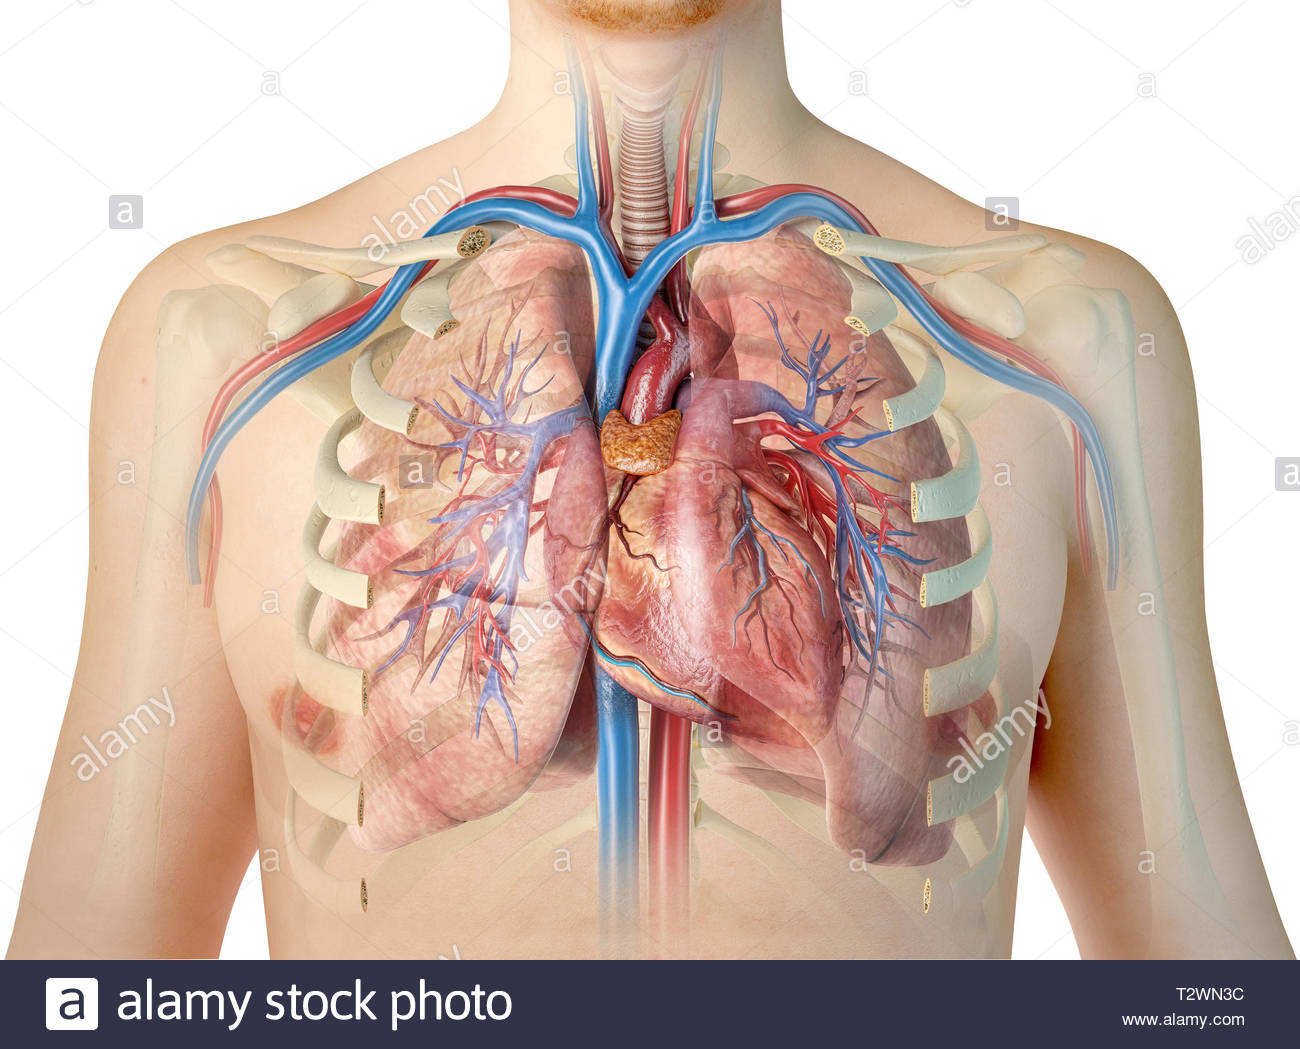 image of lungs and heart in human body